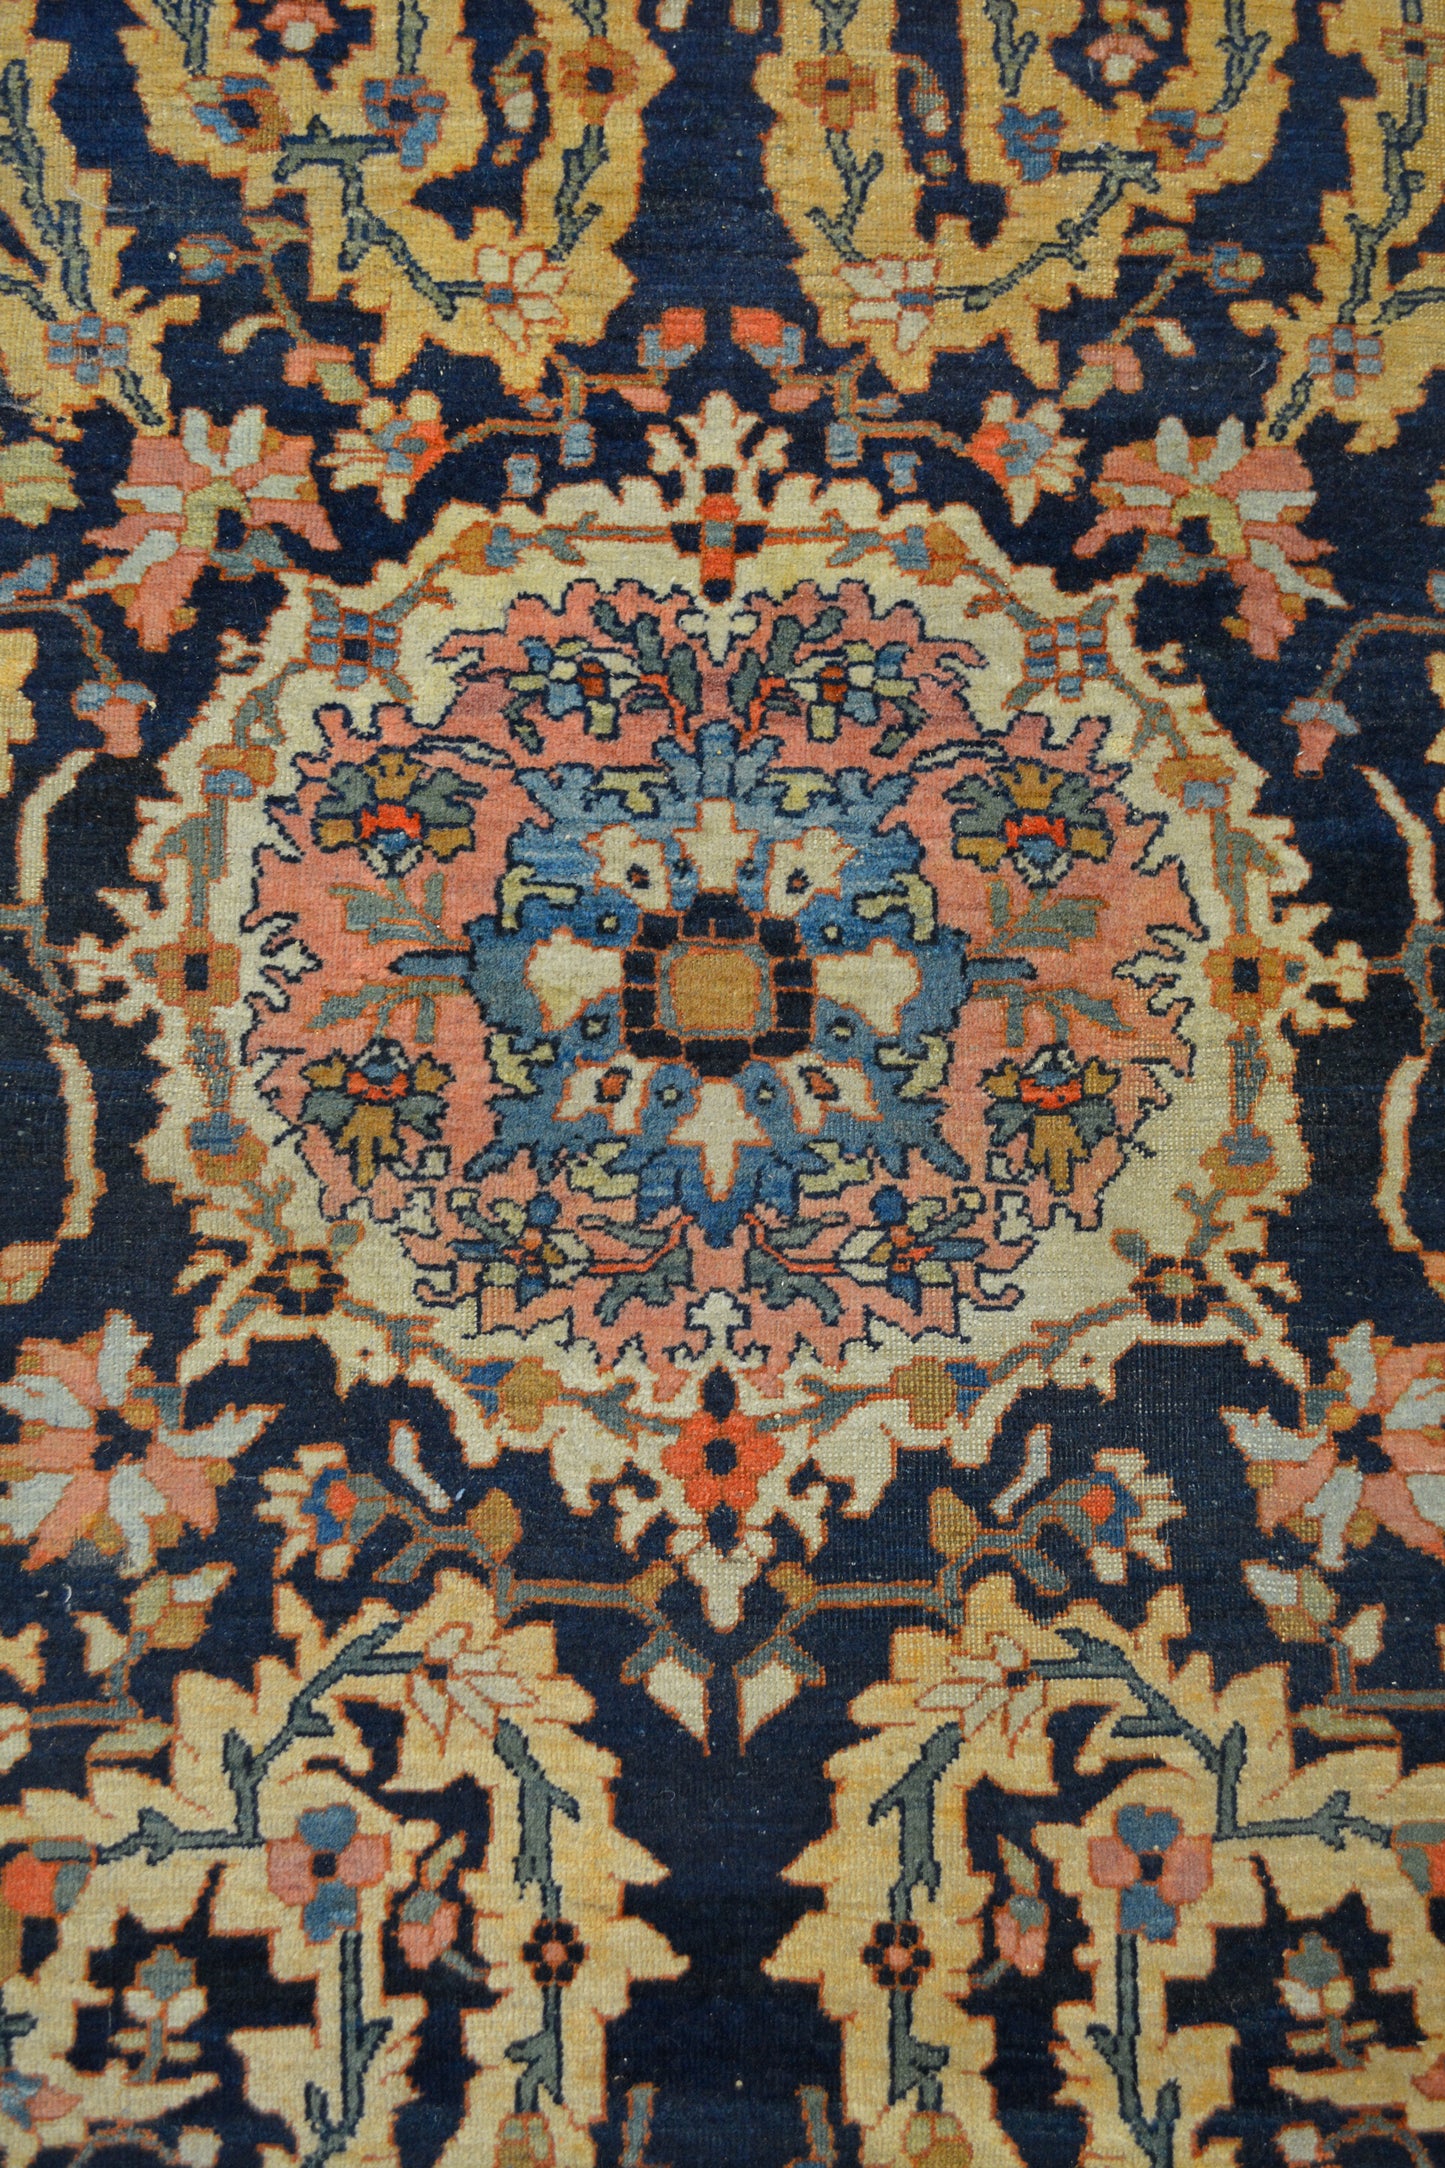 The center of the rug is a coral composition with white, salmon, blue, yellow, and green color scheme.